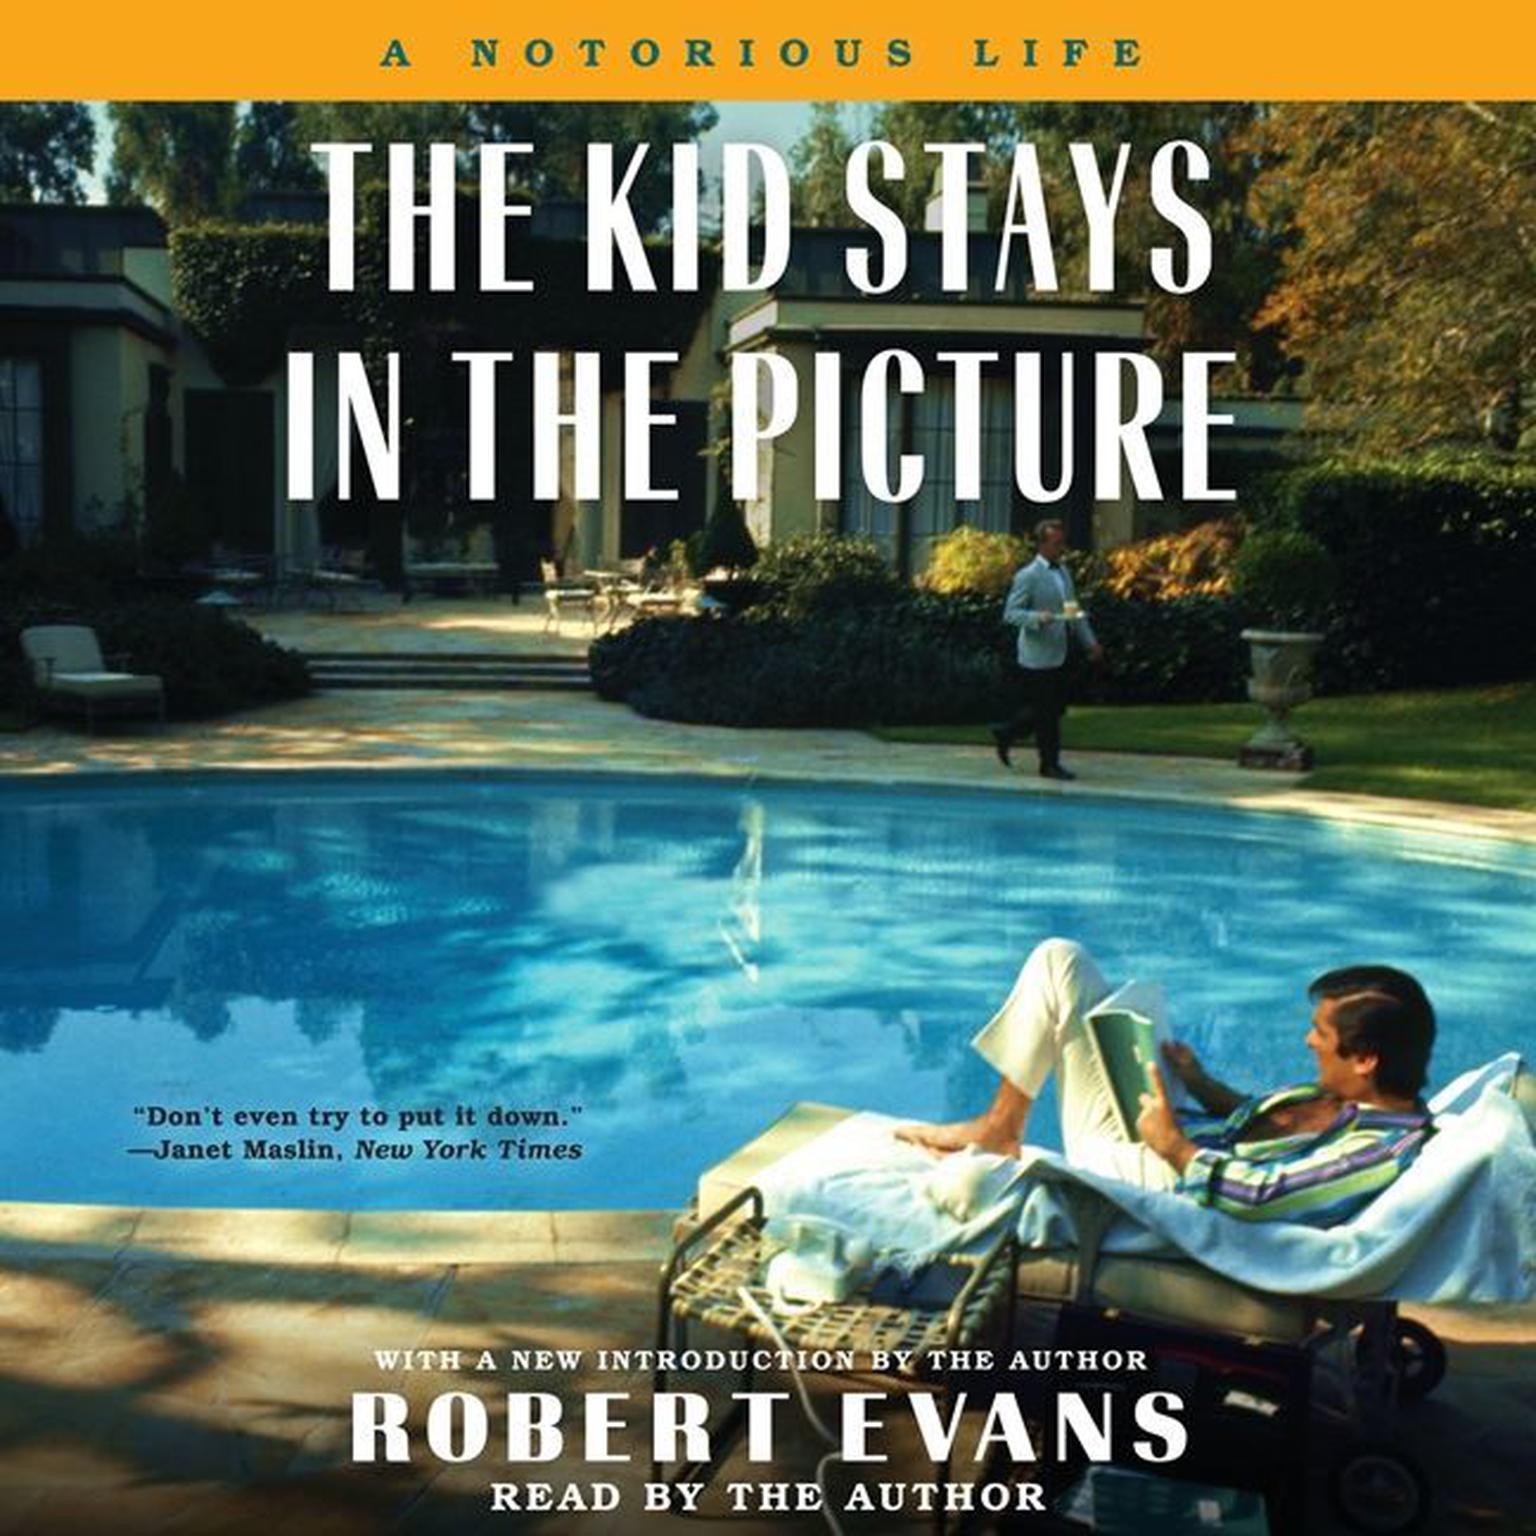 The Kid Stays in the Picture (Abridged): A Notorious Life Audiobook, by Robert Evans